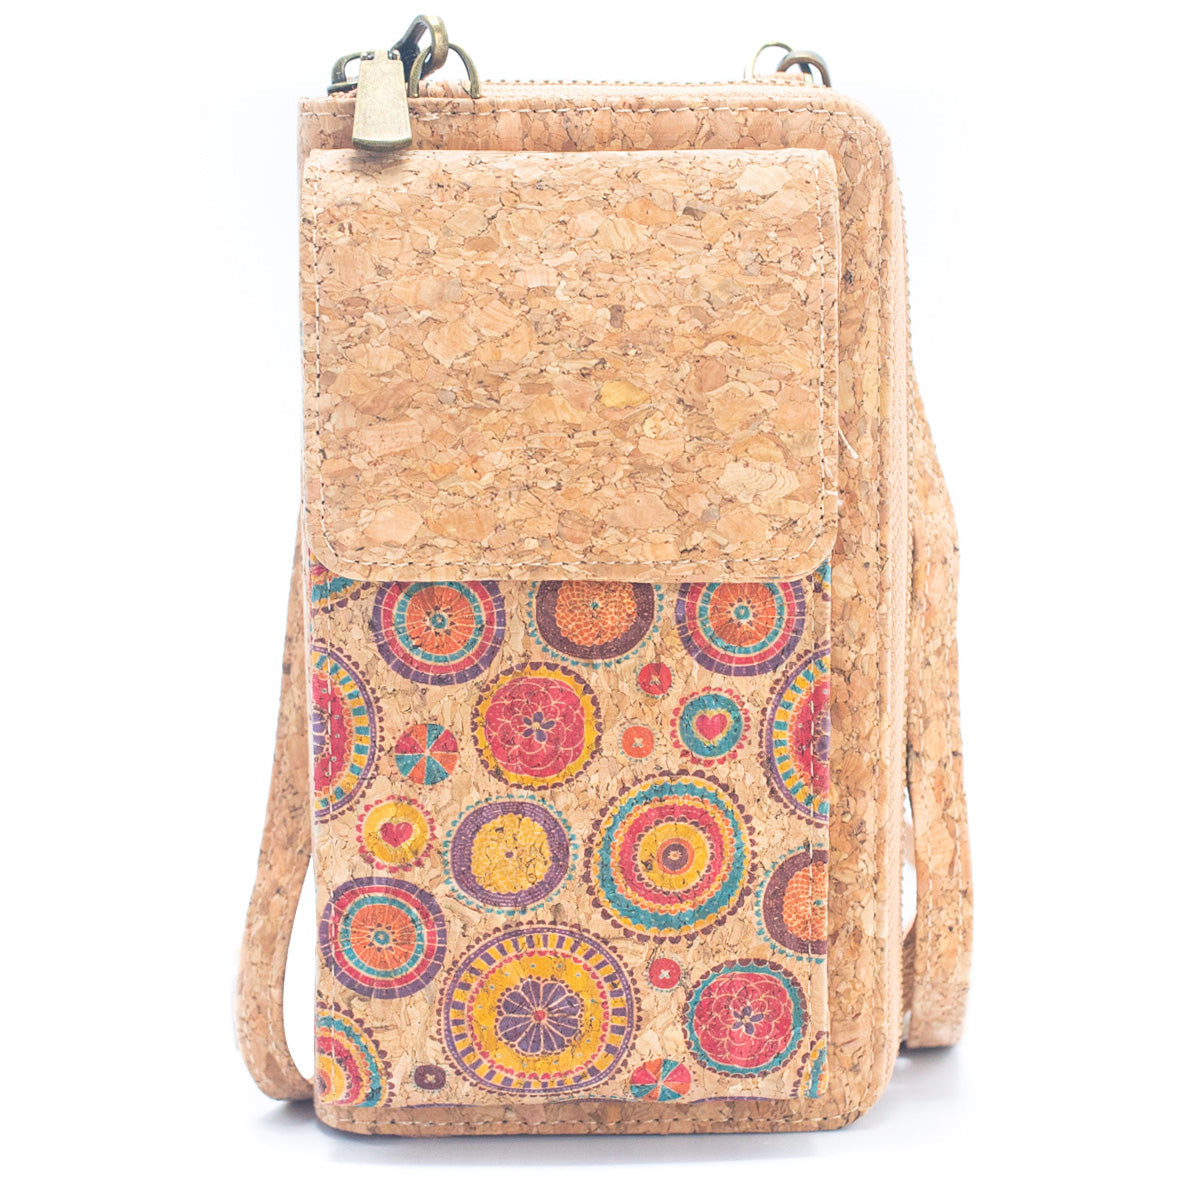 Natural Cork Crossbody Zipper Wallet w/ Phone Compartiment | THE CORK COLLECTION